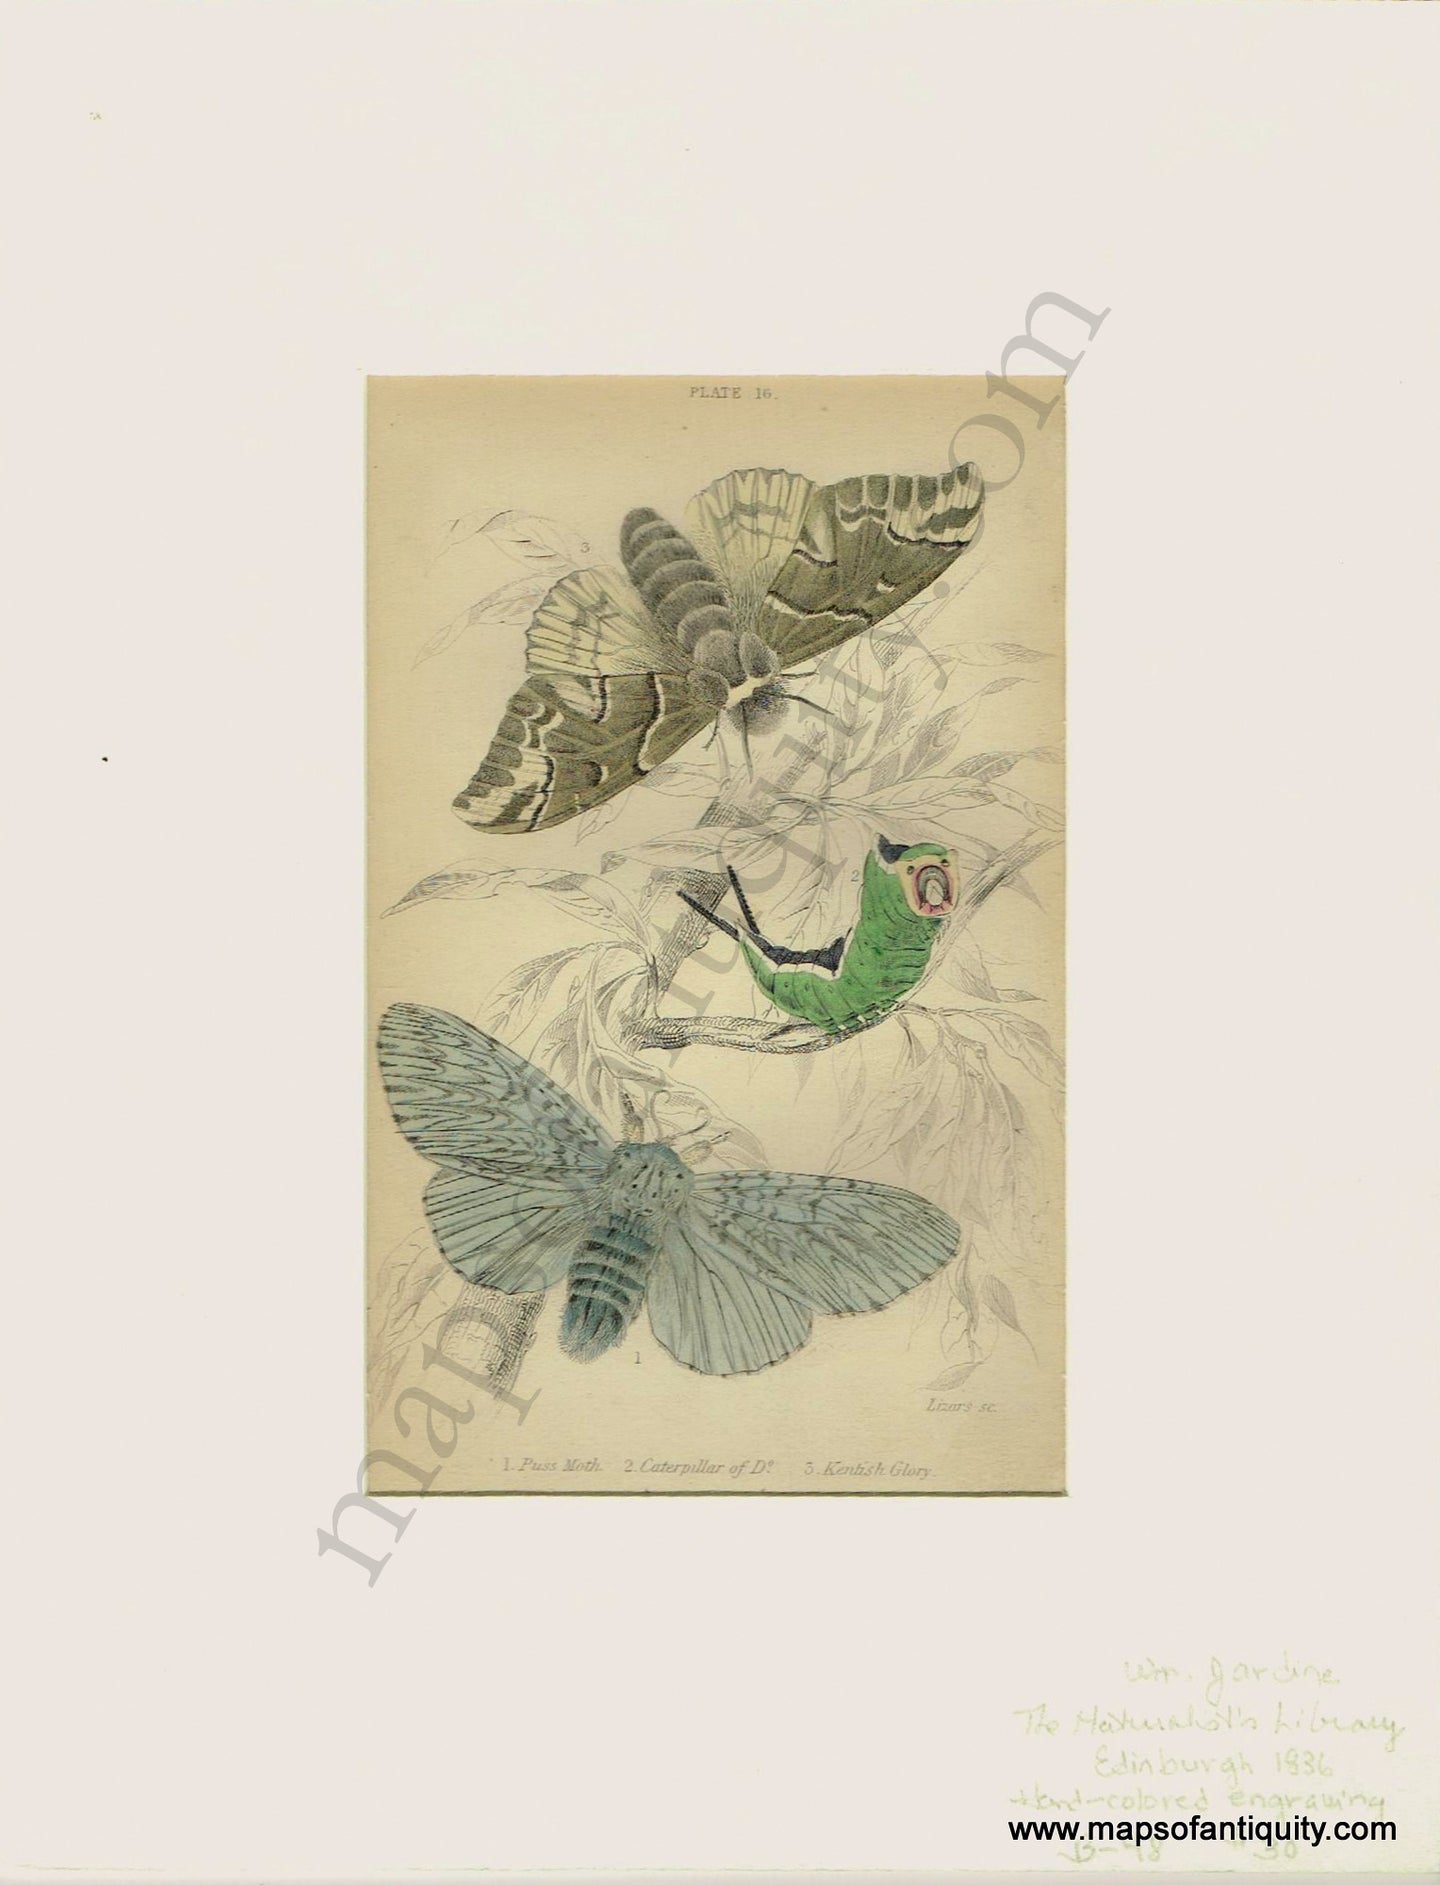 Antique-Print-Prints-Illustration-Illustrations-Engraved-Engraving-Engravings-Puss-Moth-Caterpillar-of-Do.-Kentish-Glory-Moth-Moths-Butterfly-Butterflies-Insects-Bugs-Natural-History-Diagram-Diagrams-Naturalist's-Library-Jardine-1836-1830s-1800s-Early-Mid-19th-Century-Maps-of-Antiquity